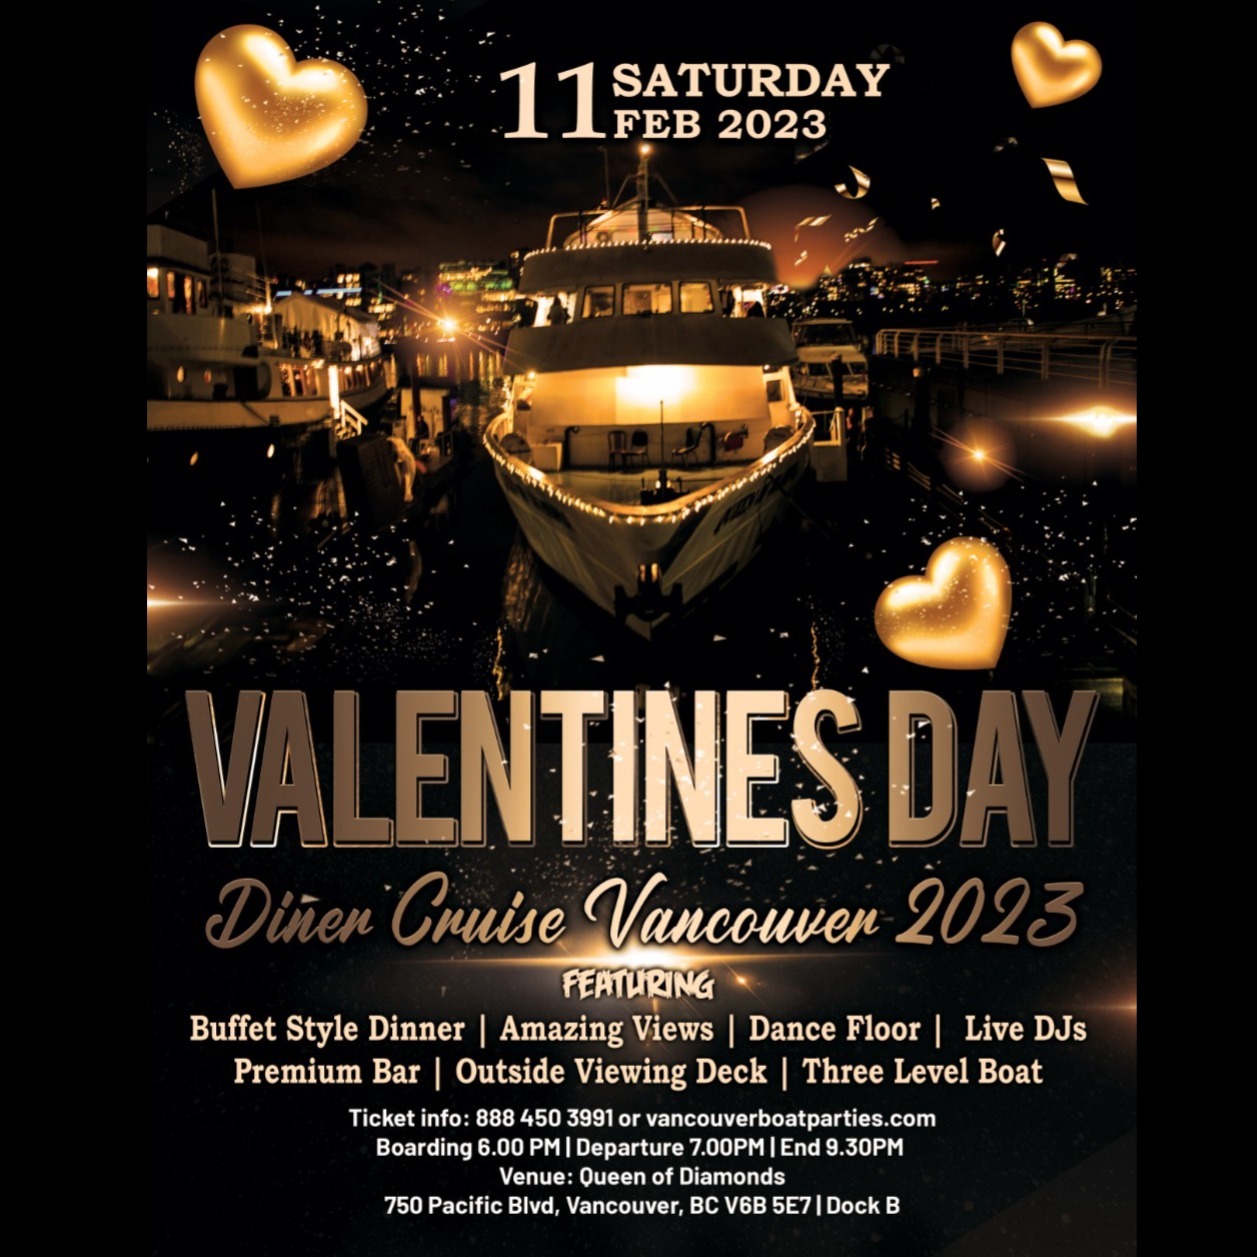 VALENTINE'S DAY DINNER CRUISE VANCOUVER 2023 | THINGS TO DO VALENTINES DAY 